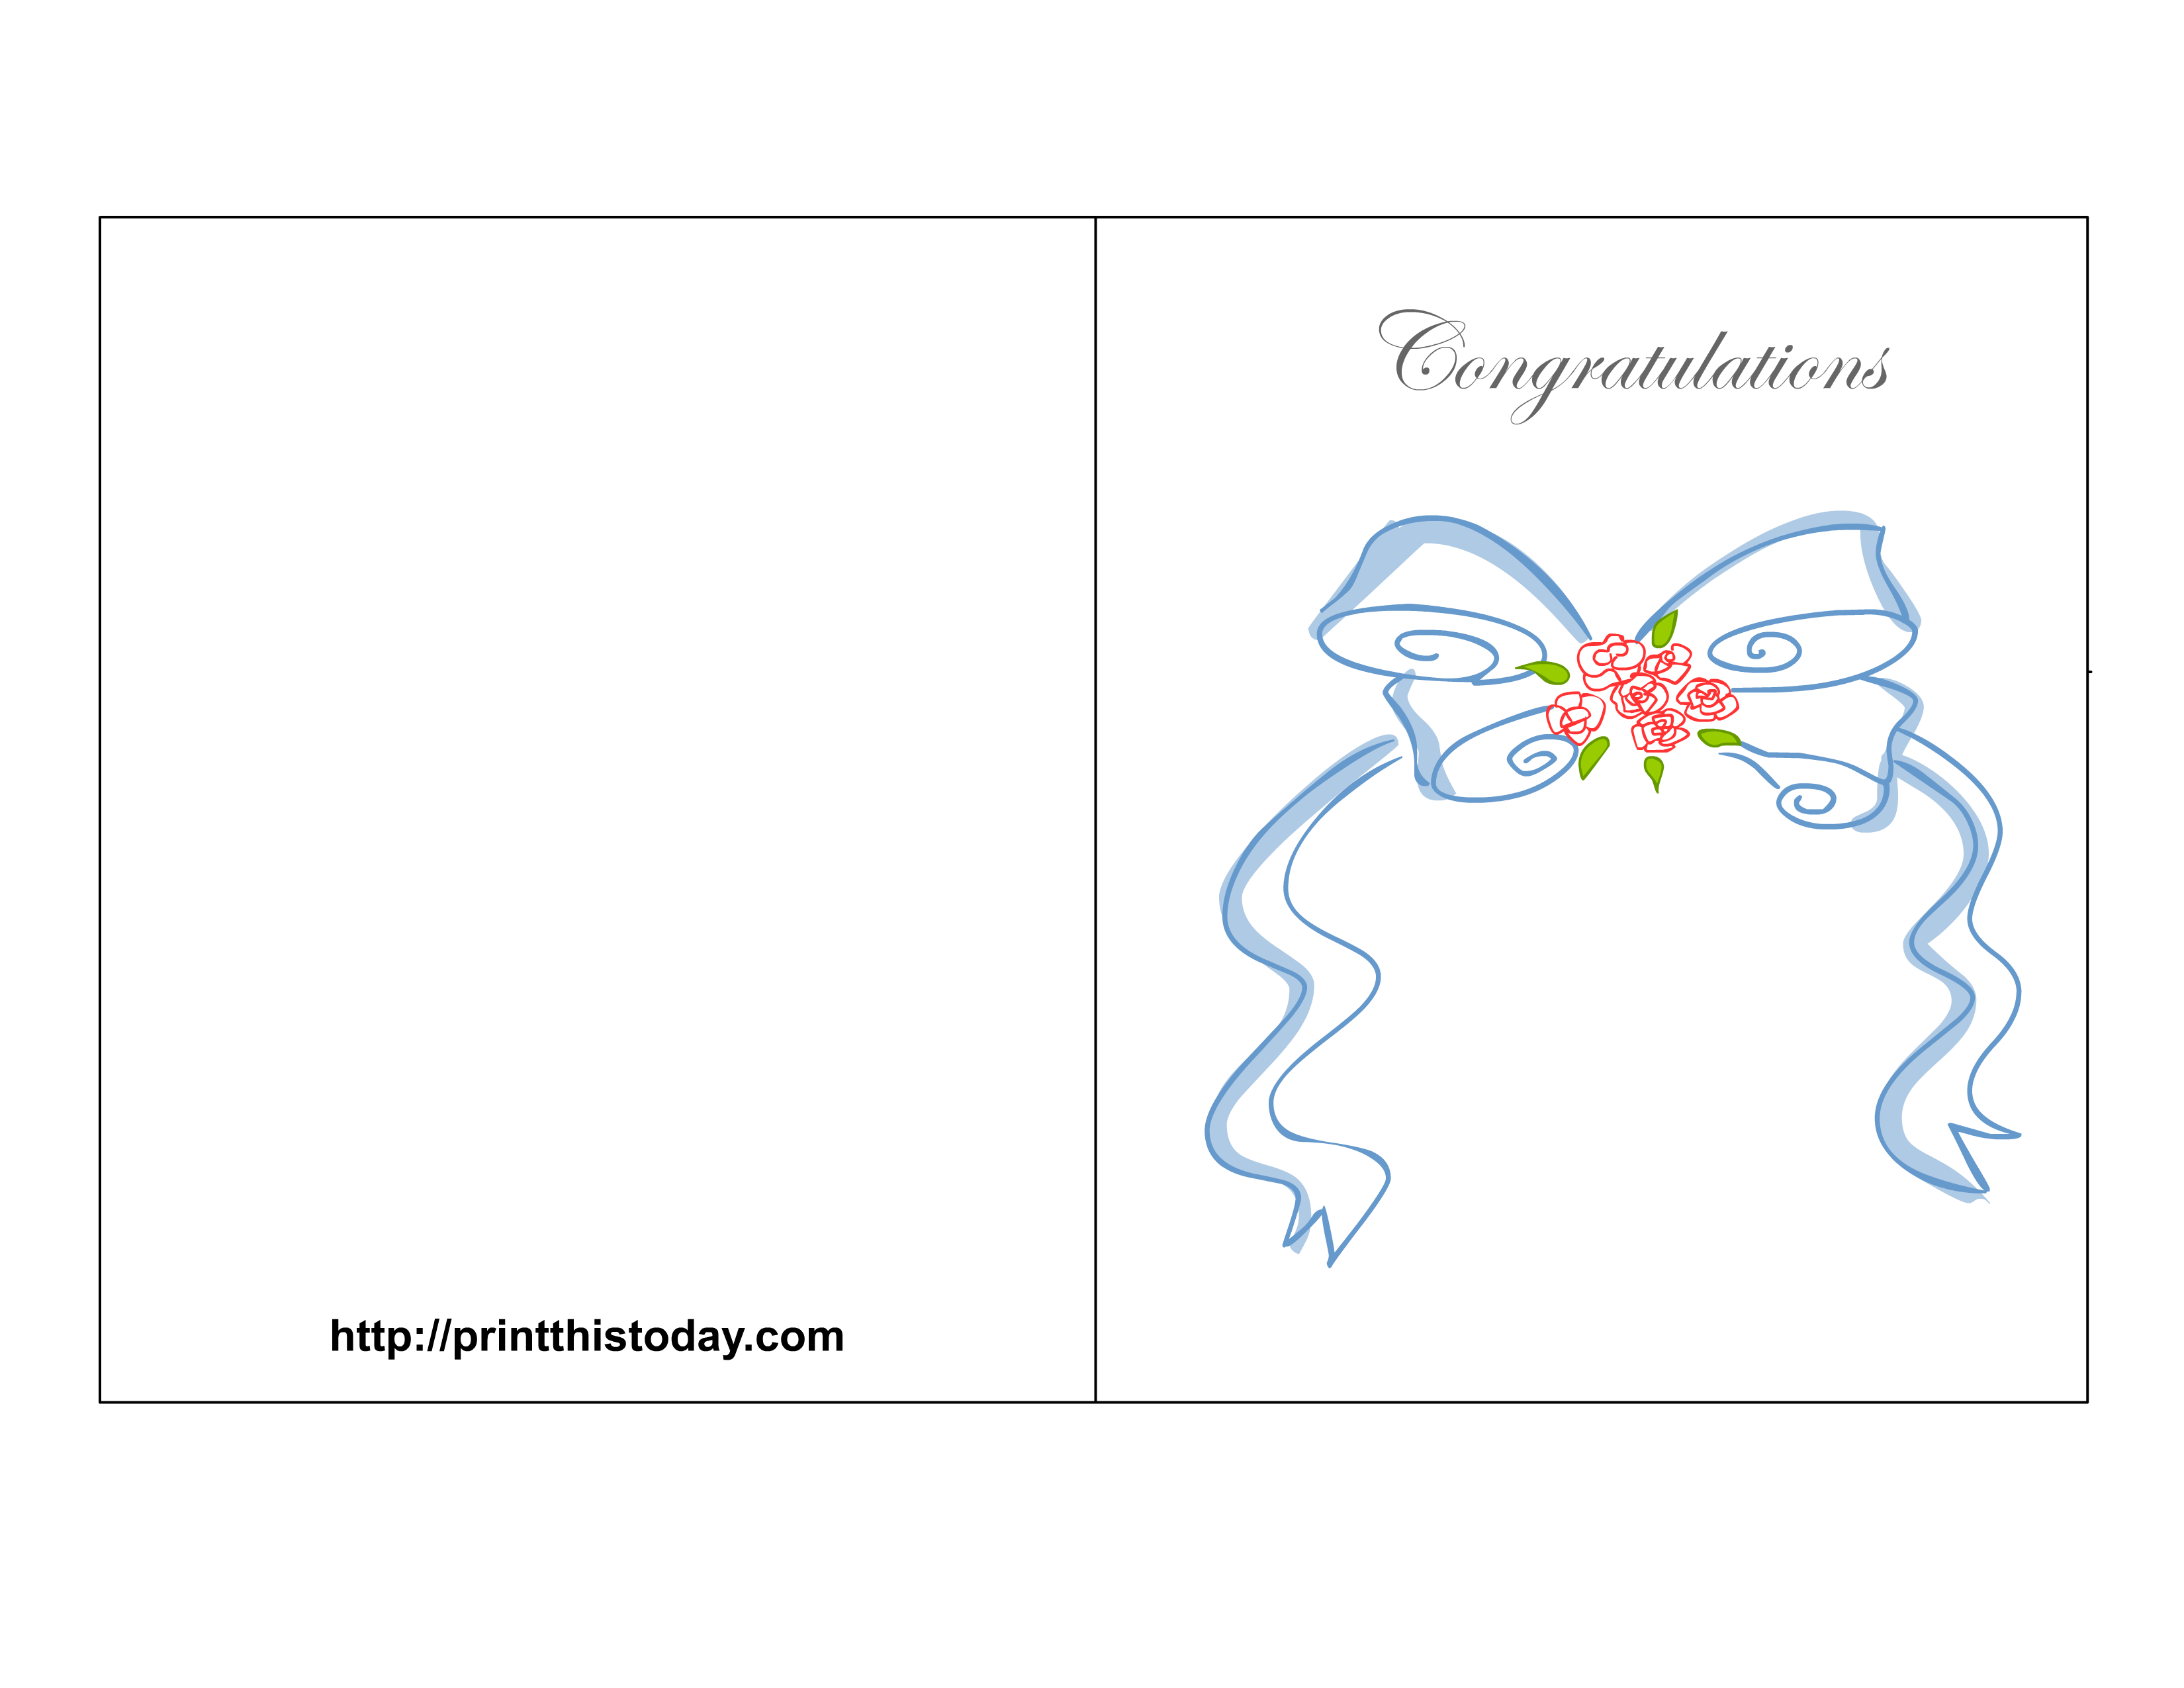 Paper Congrats Card Wedding Wishes Engagement Card Graduation Card 